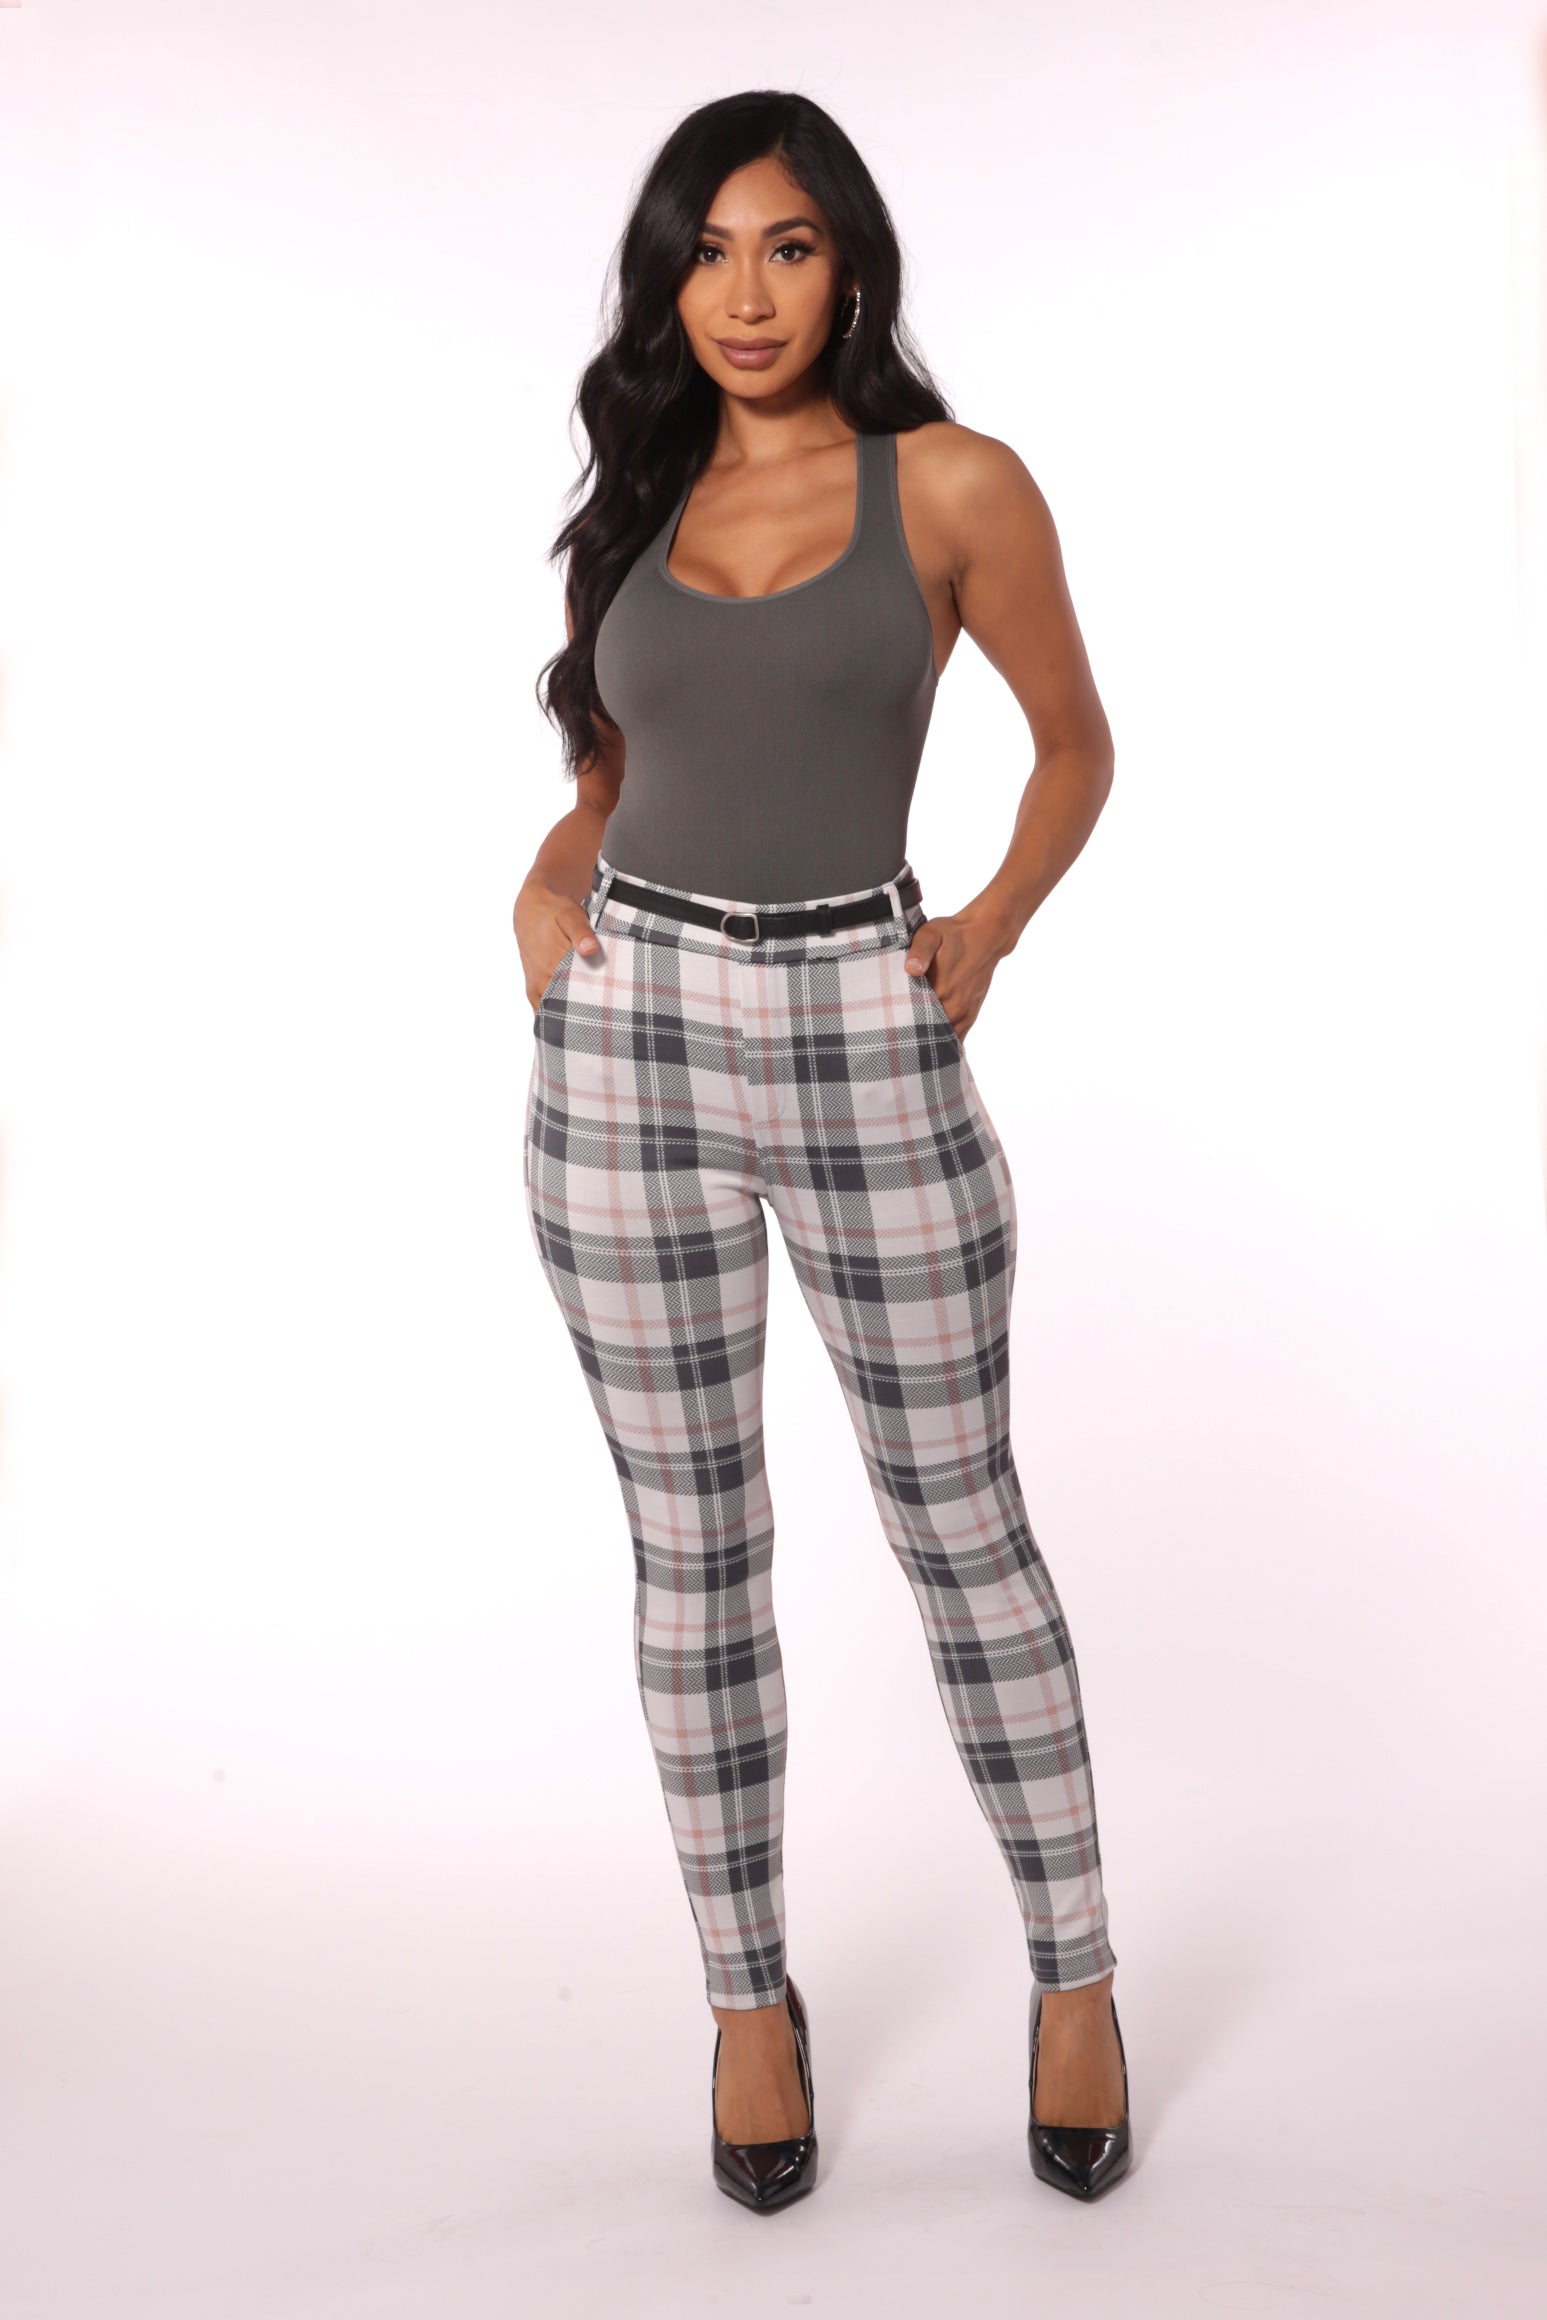 Wholesale Womens Sculpting Treggings With Faux Leather Belt - White, Sage Plaid - S&G Apparel